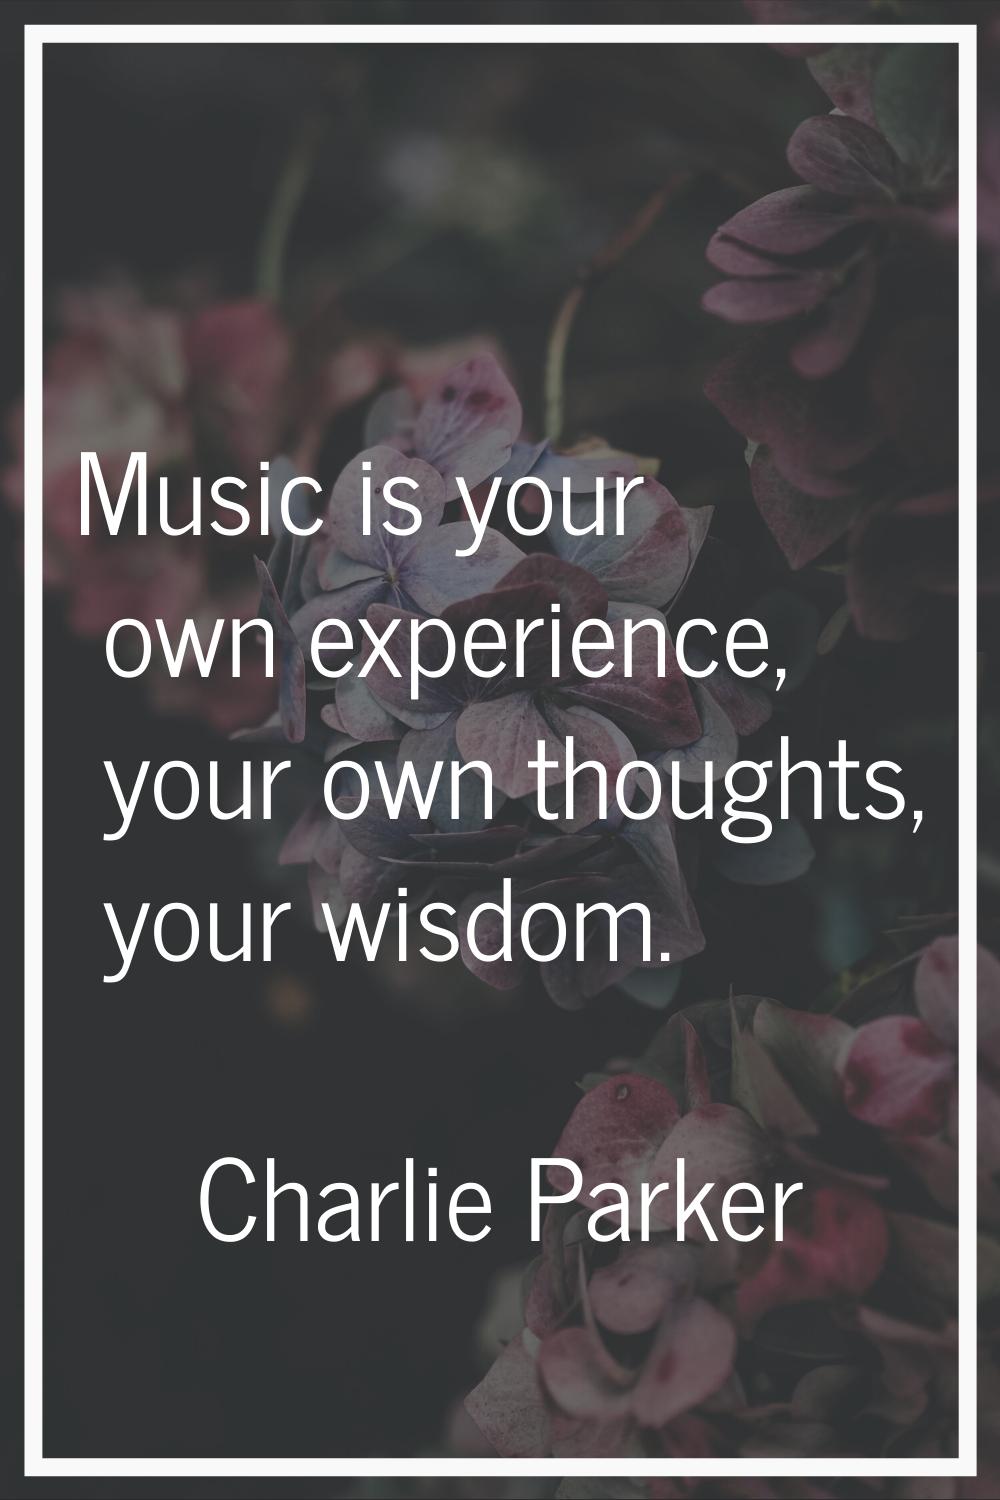 Music is your own experience, your own thoughts, your wisdom.